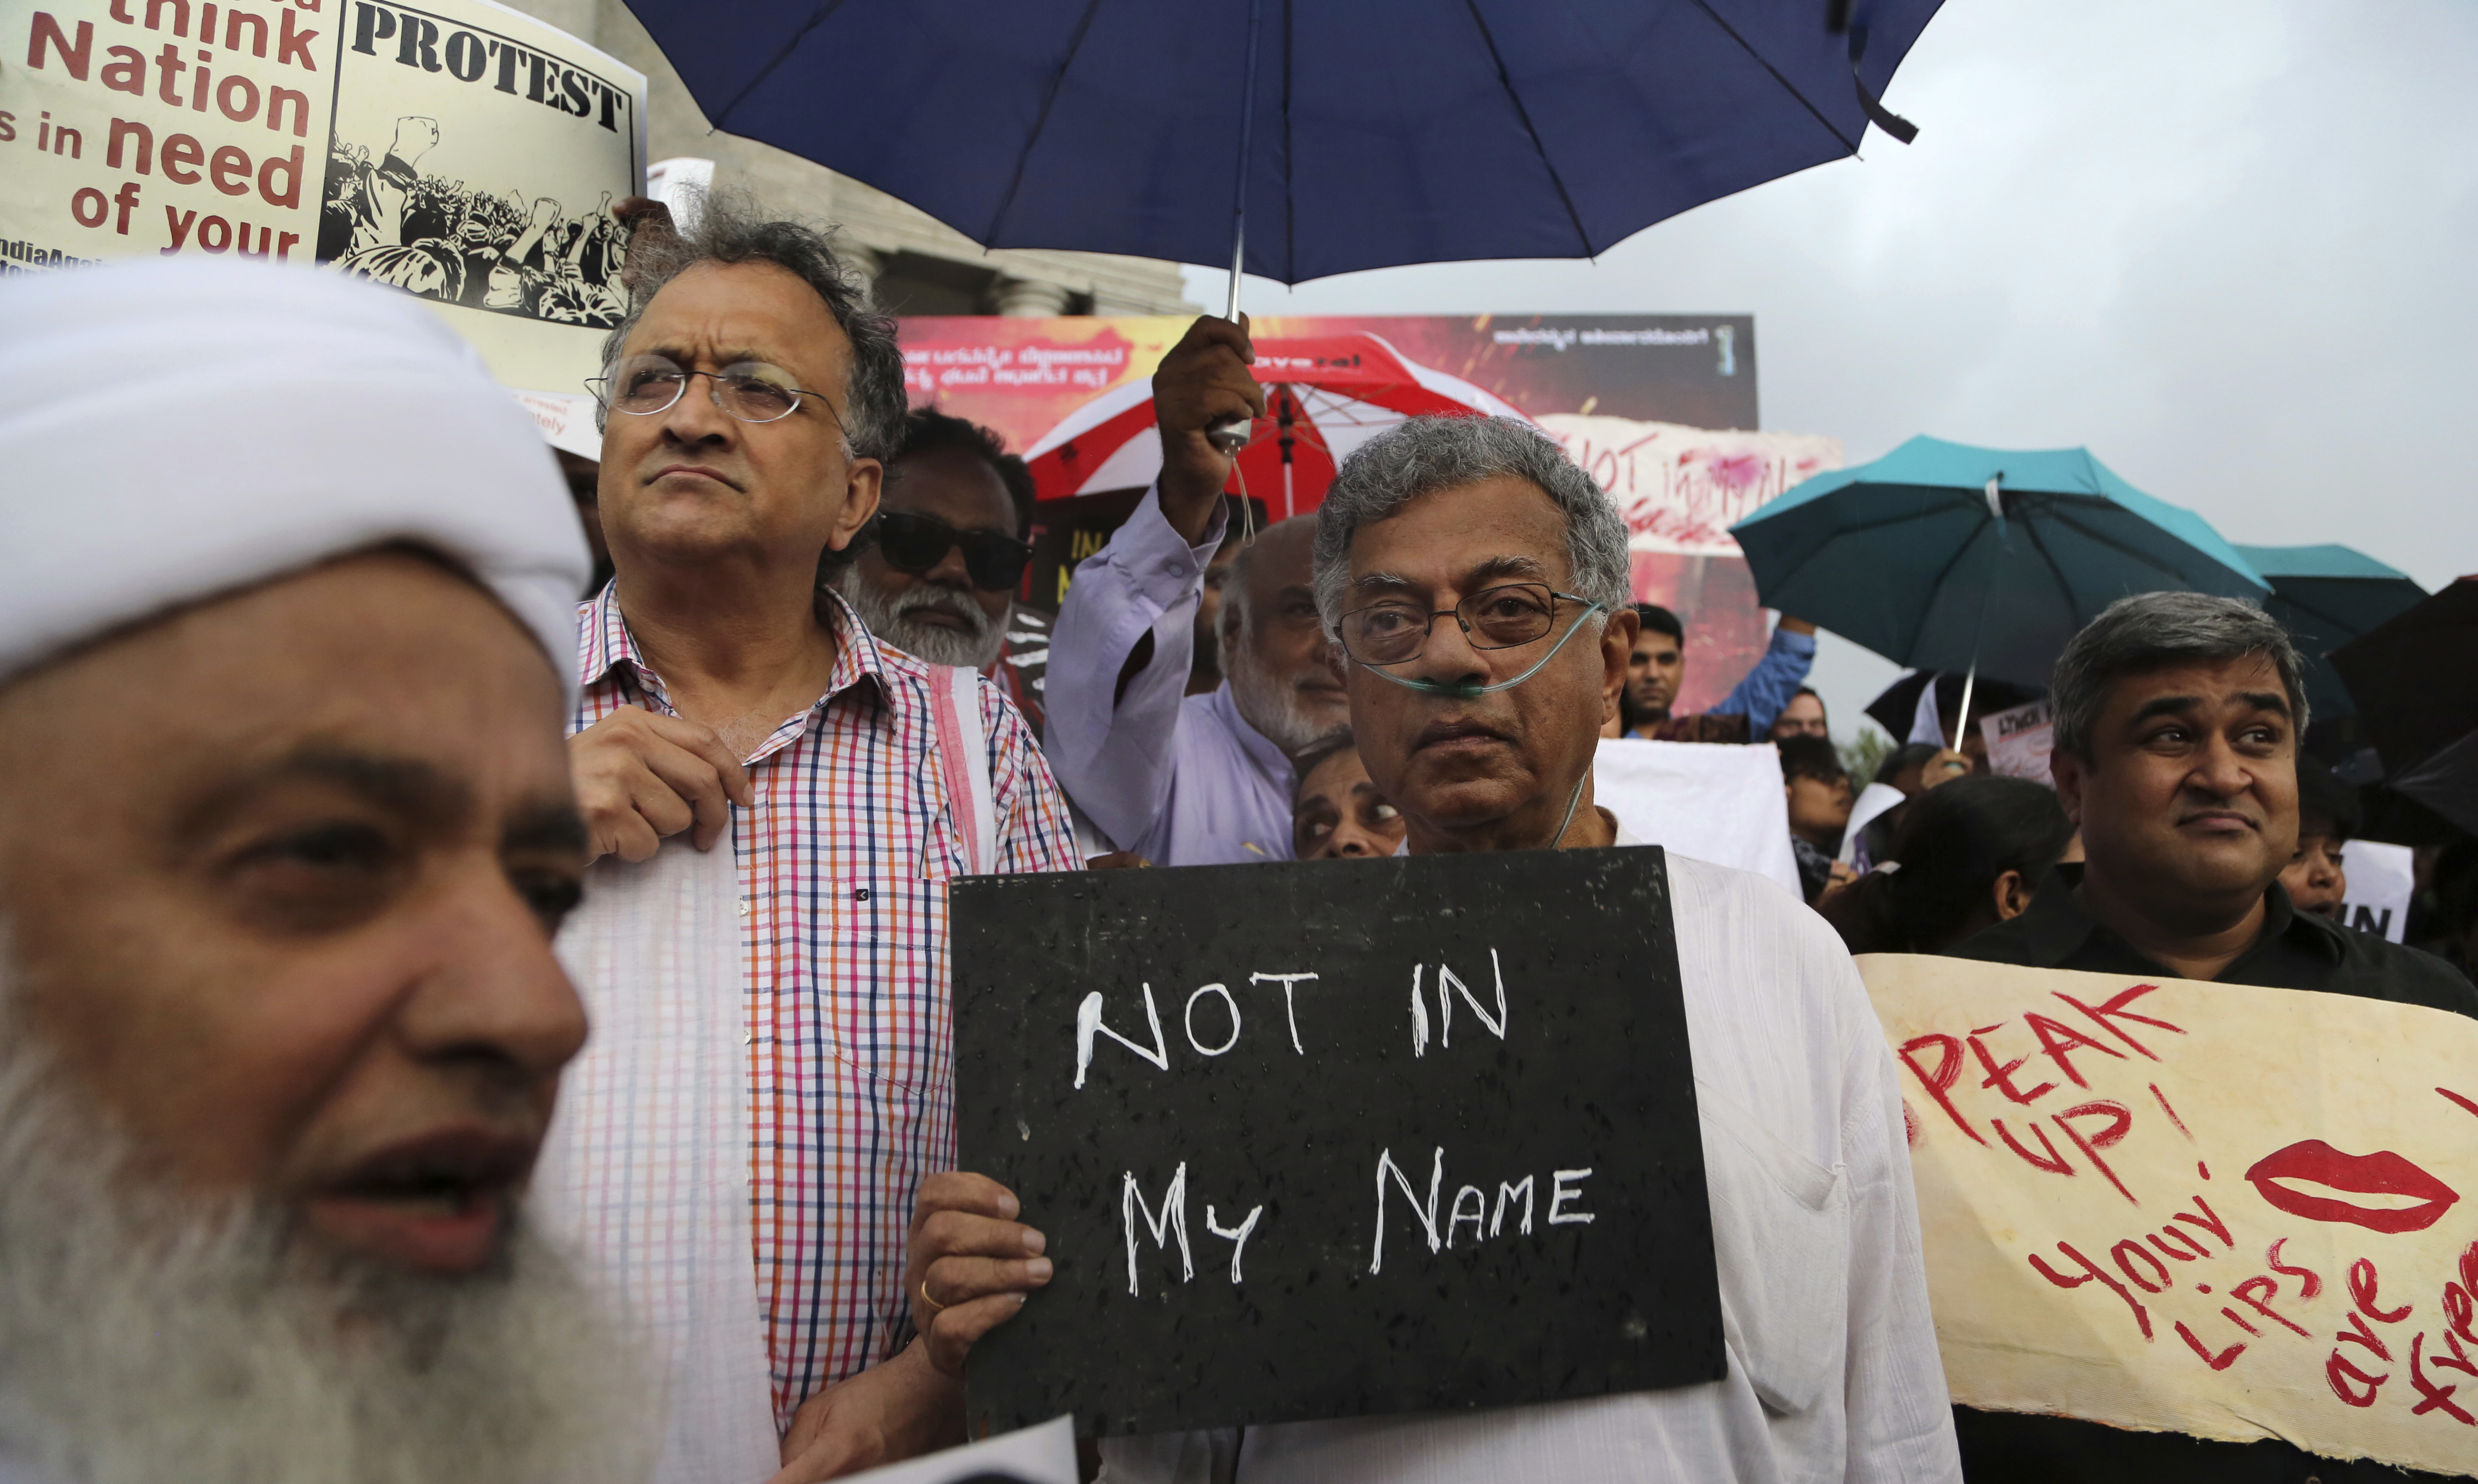 Indian actor Girish Karnad, center, holds a placard during a protest against a spate of violent attacks across the country targeting the country's Muslim minority, in Bangalore, India, Wednesday, June 28, 2017. Thousands of protestors gathered in different cities to decry the silence of India's Hindu right-wing government in the face of the public lynchings and violent attacks on at least a dozen Muslim men and boys since it was voted to power in 2014. (AP Photo/Aijaz Rahi)